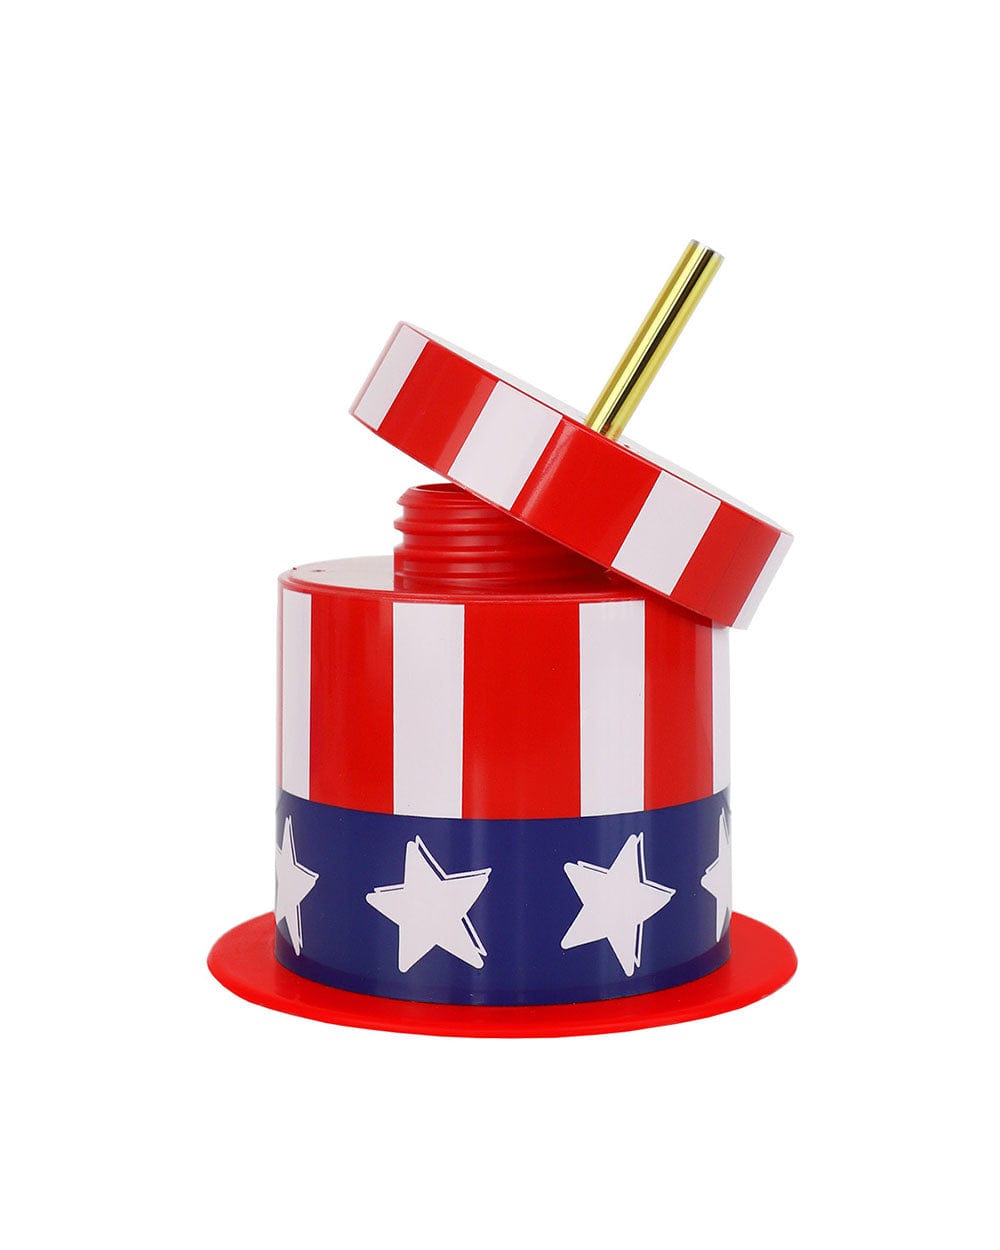 Hats Off To The USA Sipper Set with Straws (Set of 2)